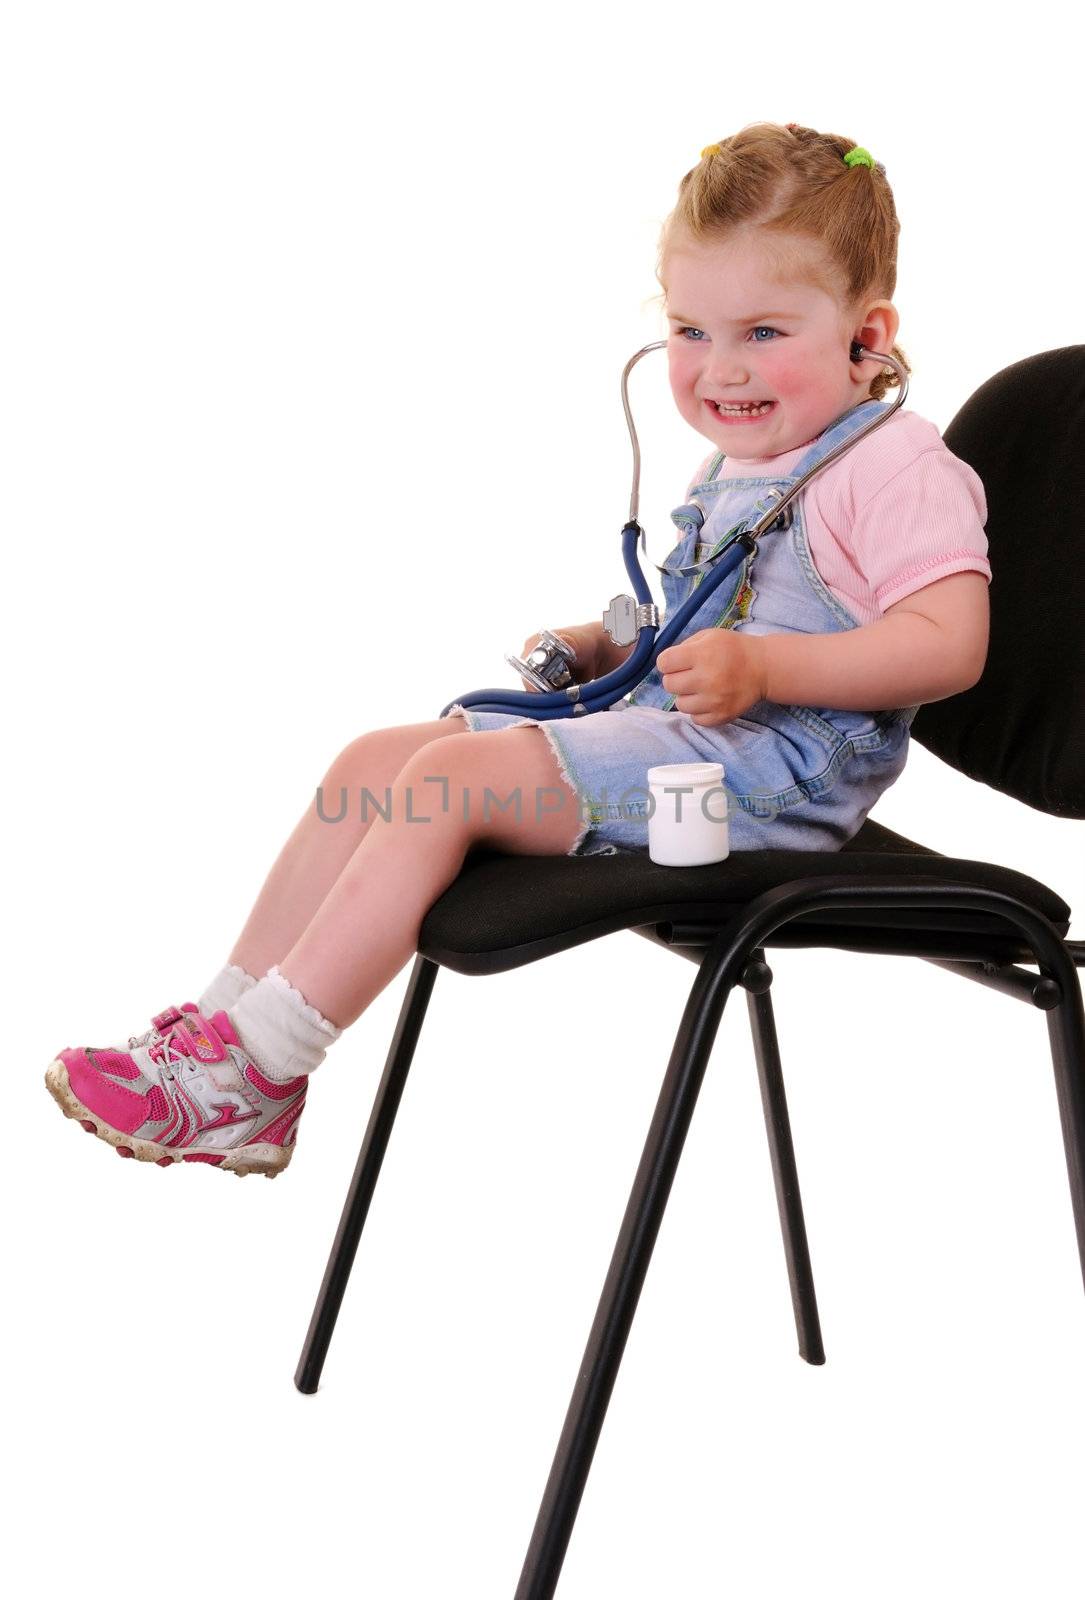 Small playful girl on chair with stethoscope isolated on white background